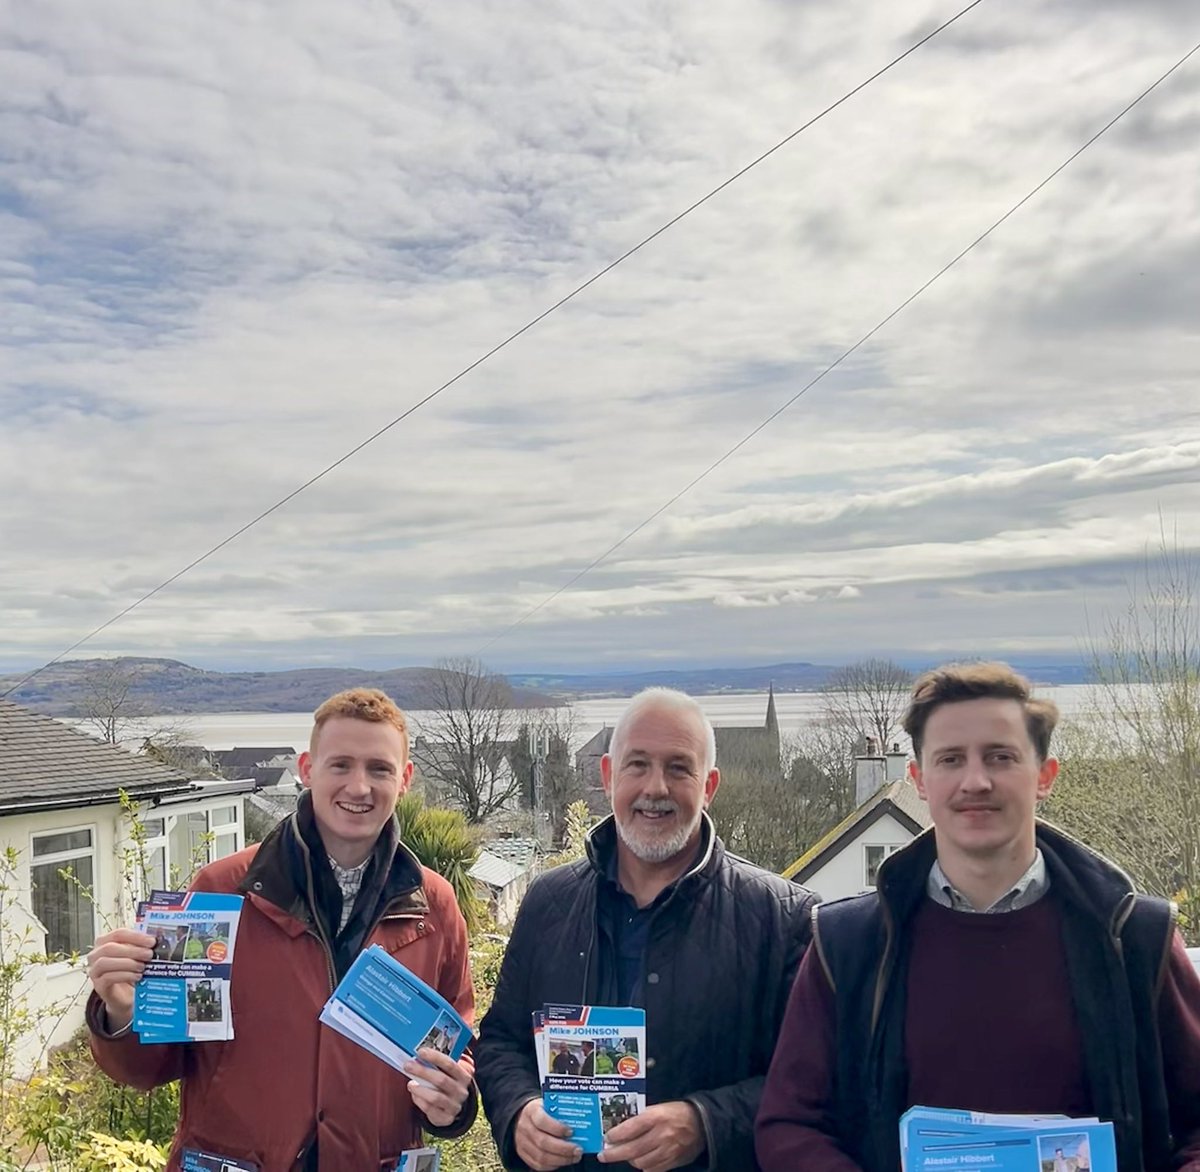 Out in #Grange today!
Supporting Mike Johnson and 
Alastair Hibbert 🗳️

🔵🔵🔵

Alastair for #GrangeAndCartmel 🇬🇧

@CllrMikeJohnson for #PFCC 🇬🇧

🔵🔵🔵

#LocalNewandFighting4You #Matty4WestmorlandandLonsdale #Conservatives #Matty4WandL #LakeDistrict #Cumbria #Westmorland…